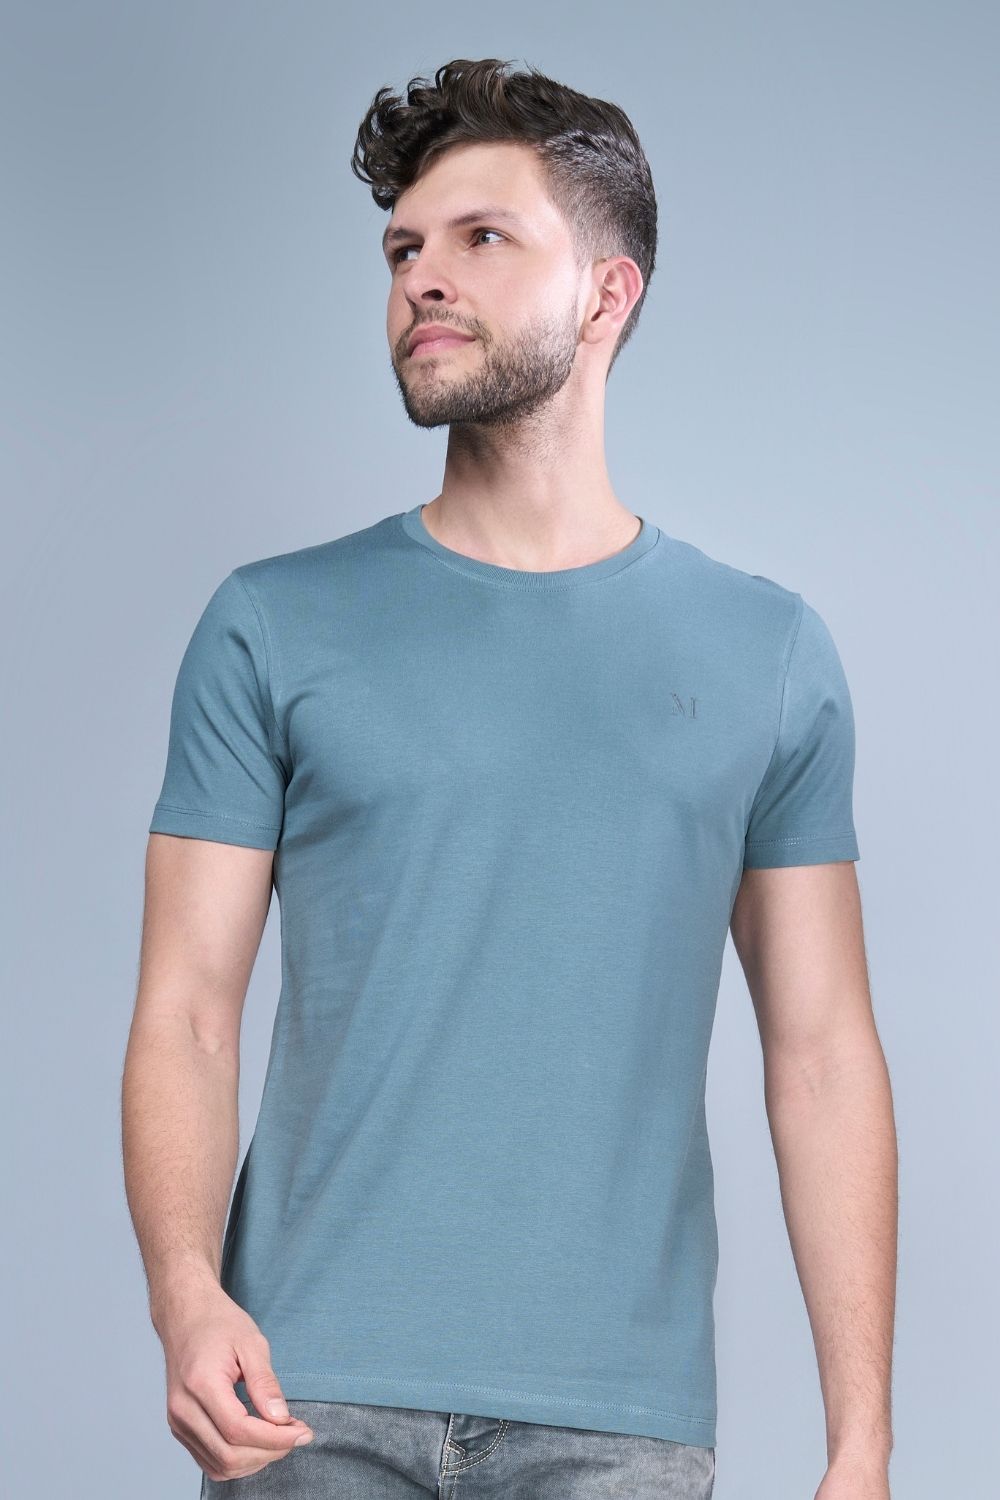 grey colored, cotton Graphic T shirt for men with half sleeves and round neck.